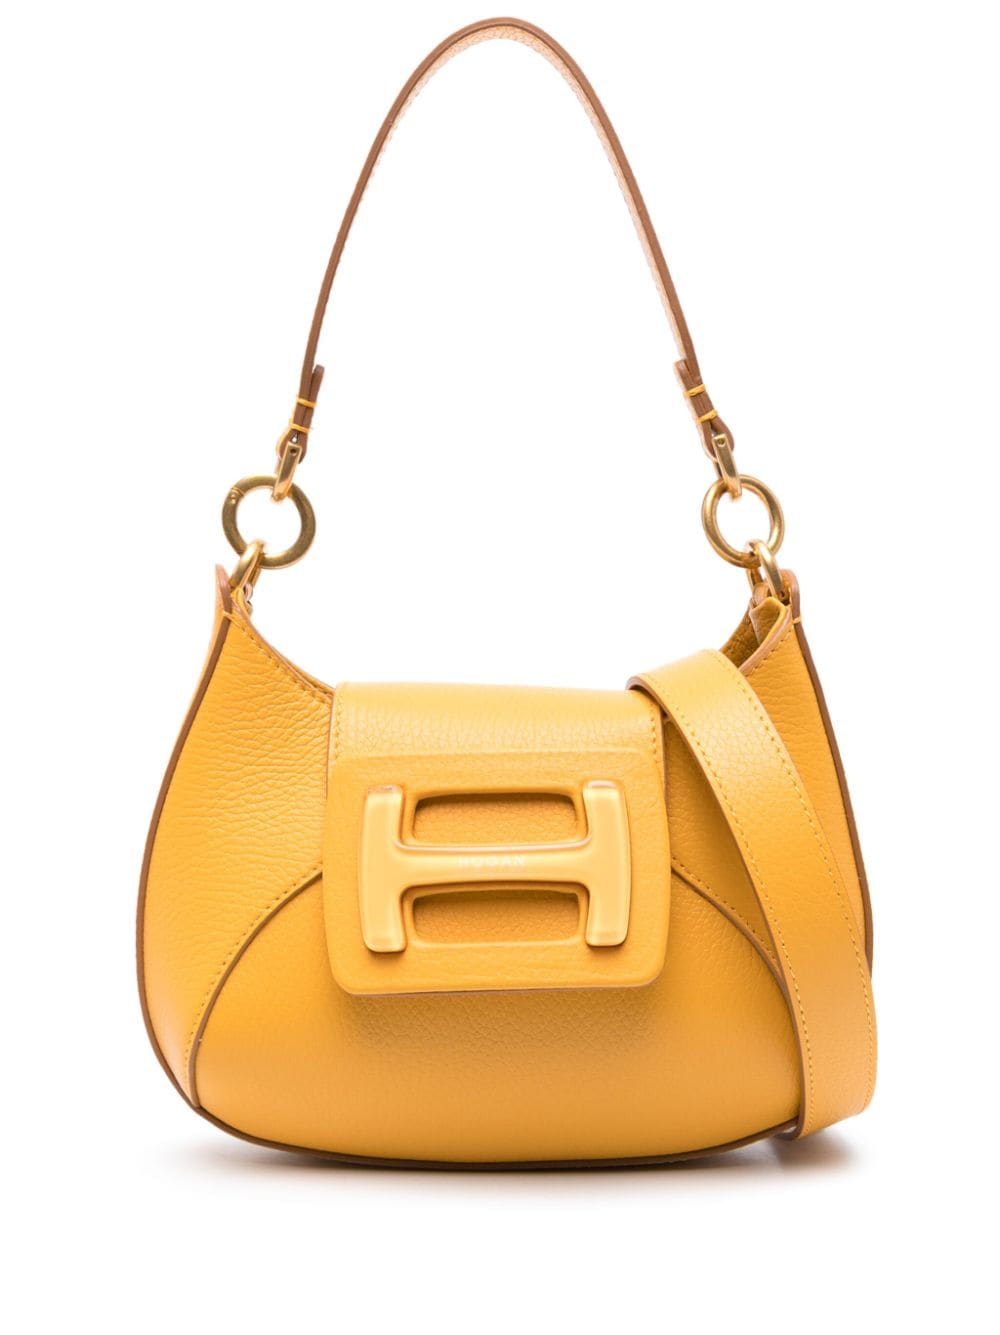 HOGAN Amber Yellow Mini Leather Hobo Handbag with Gold-Tone Accents and Detachable Strap